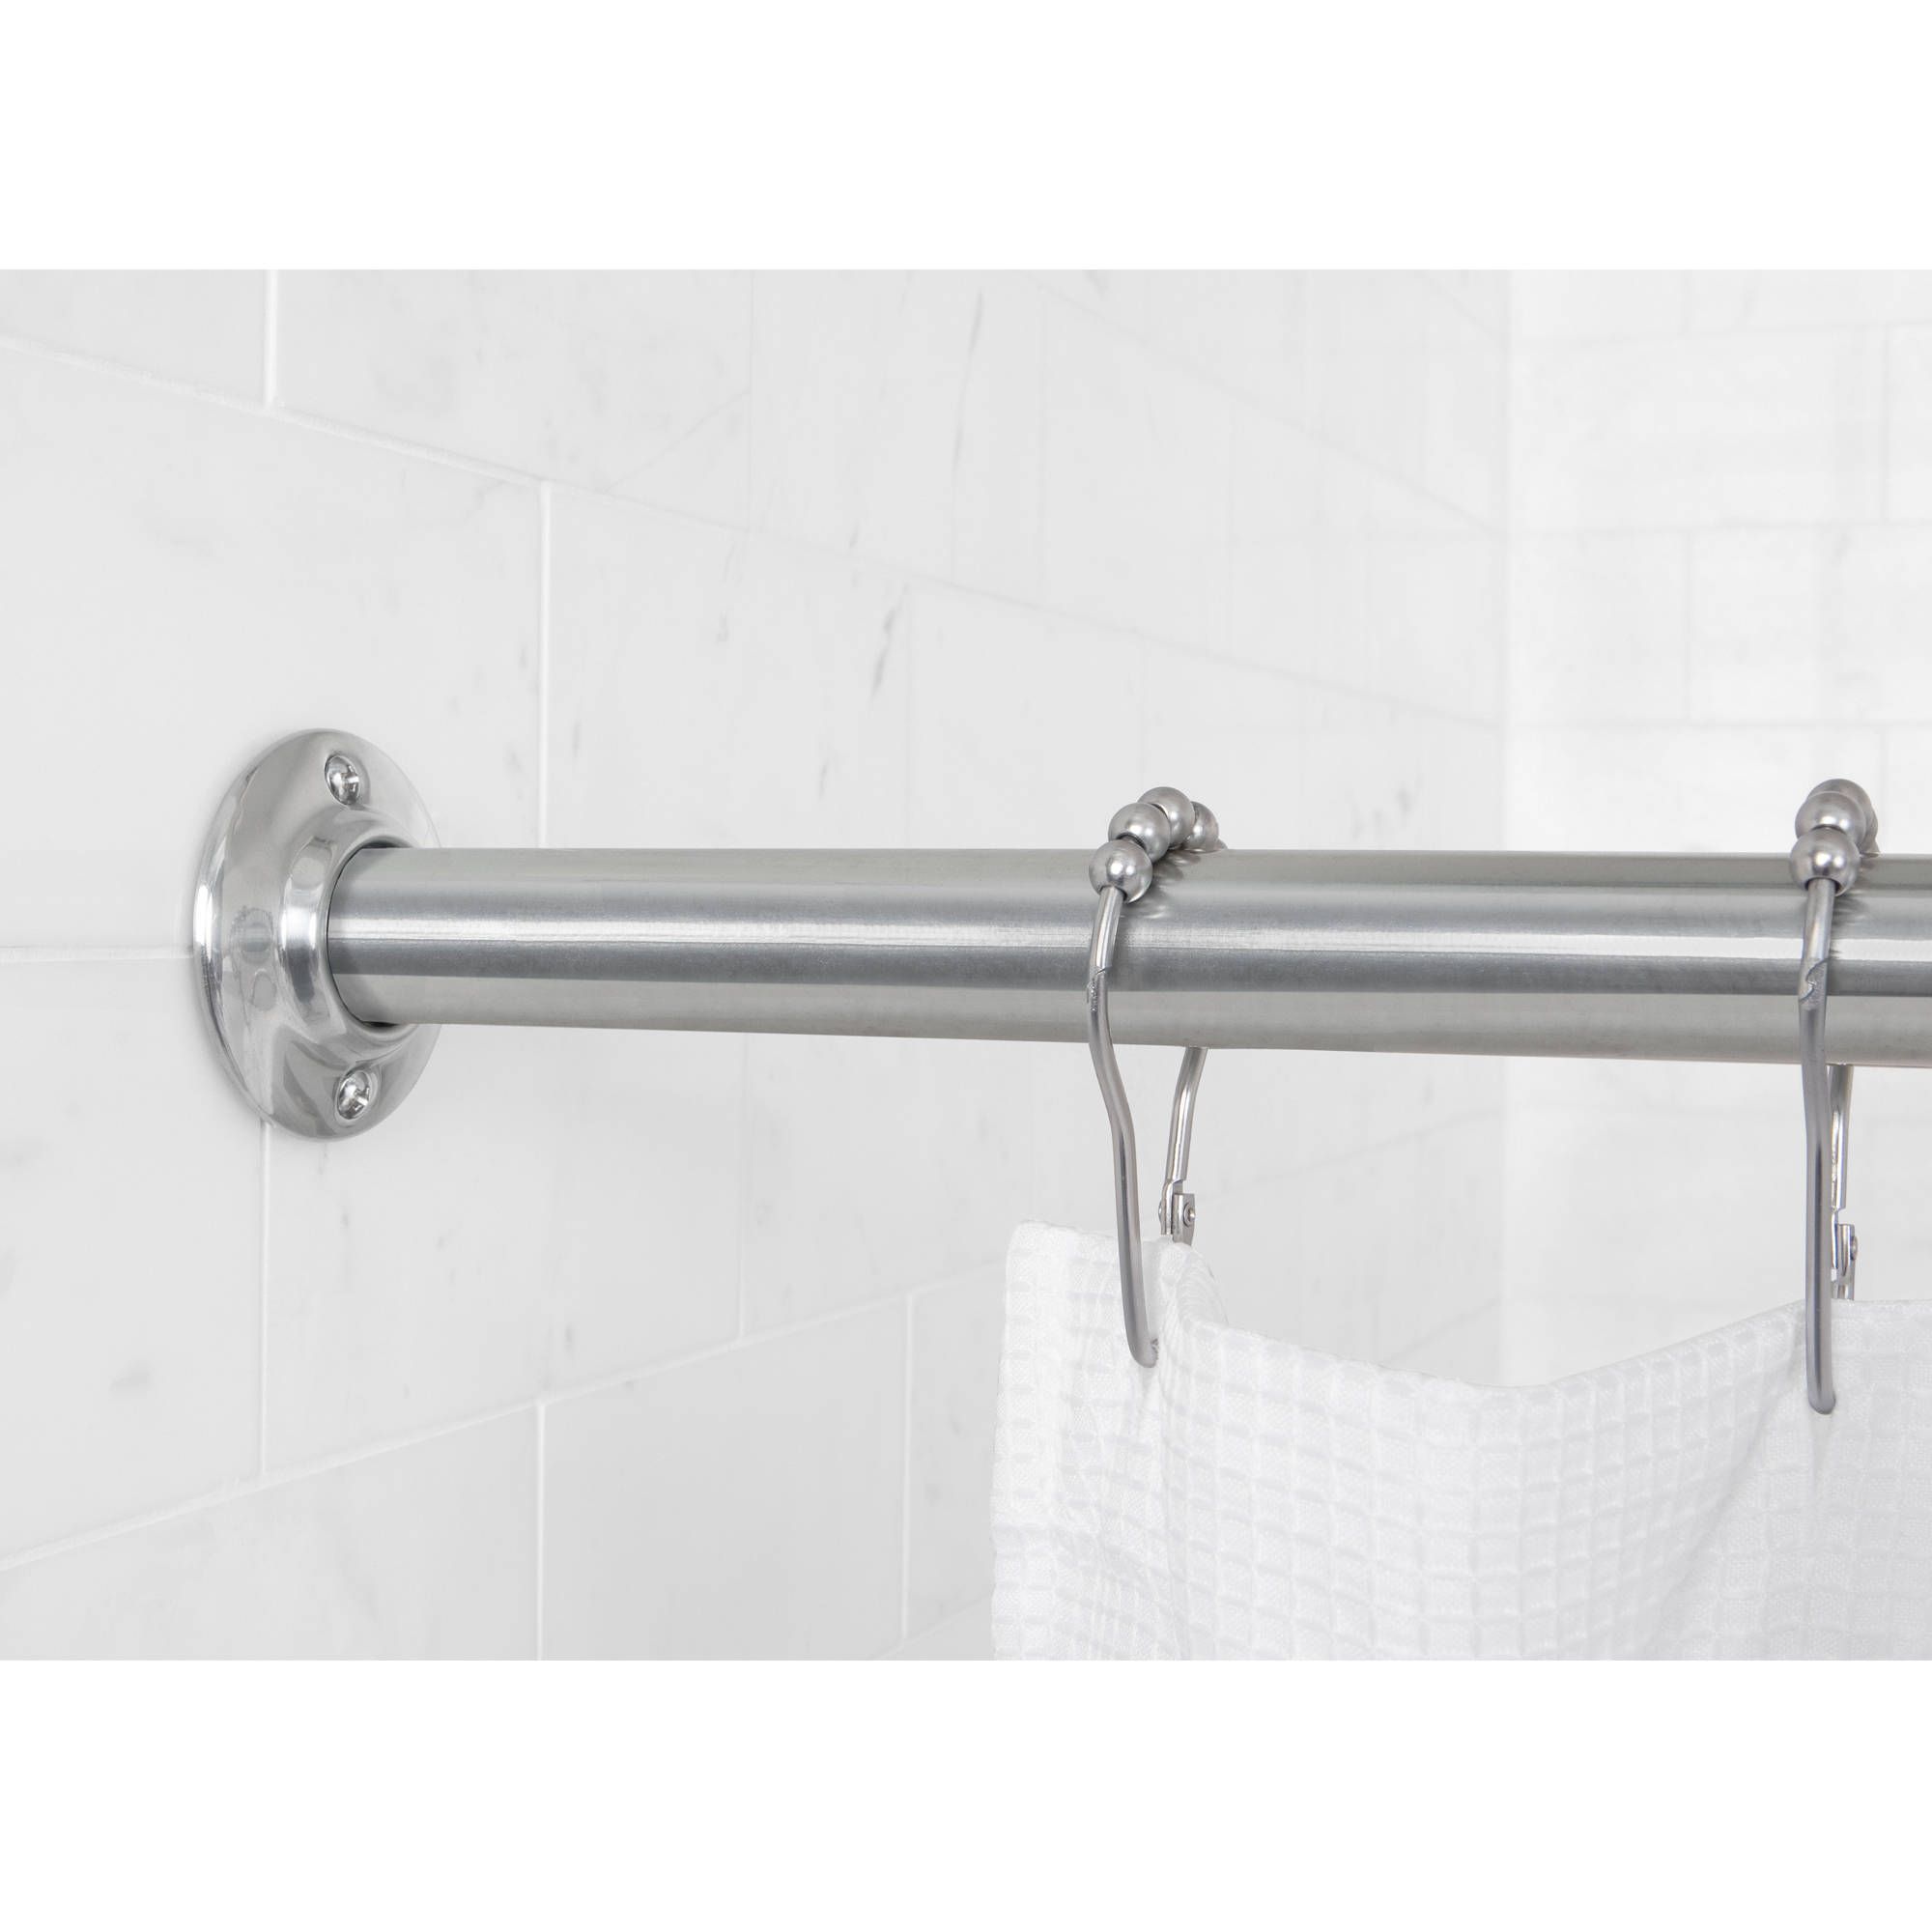 Shower Curtain Rod Within Shower Curtains Poles (View 13 of 25)